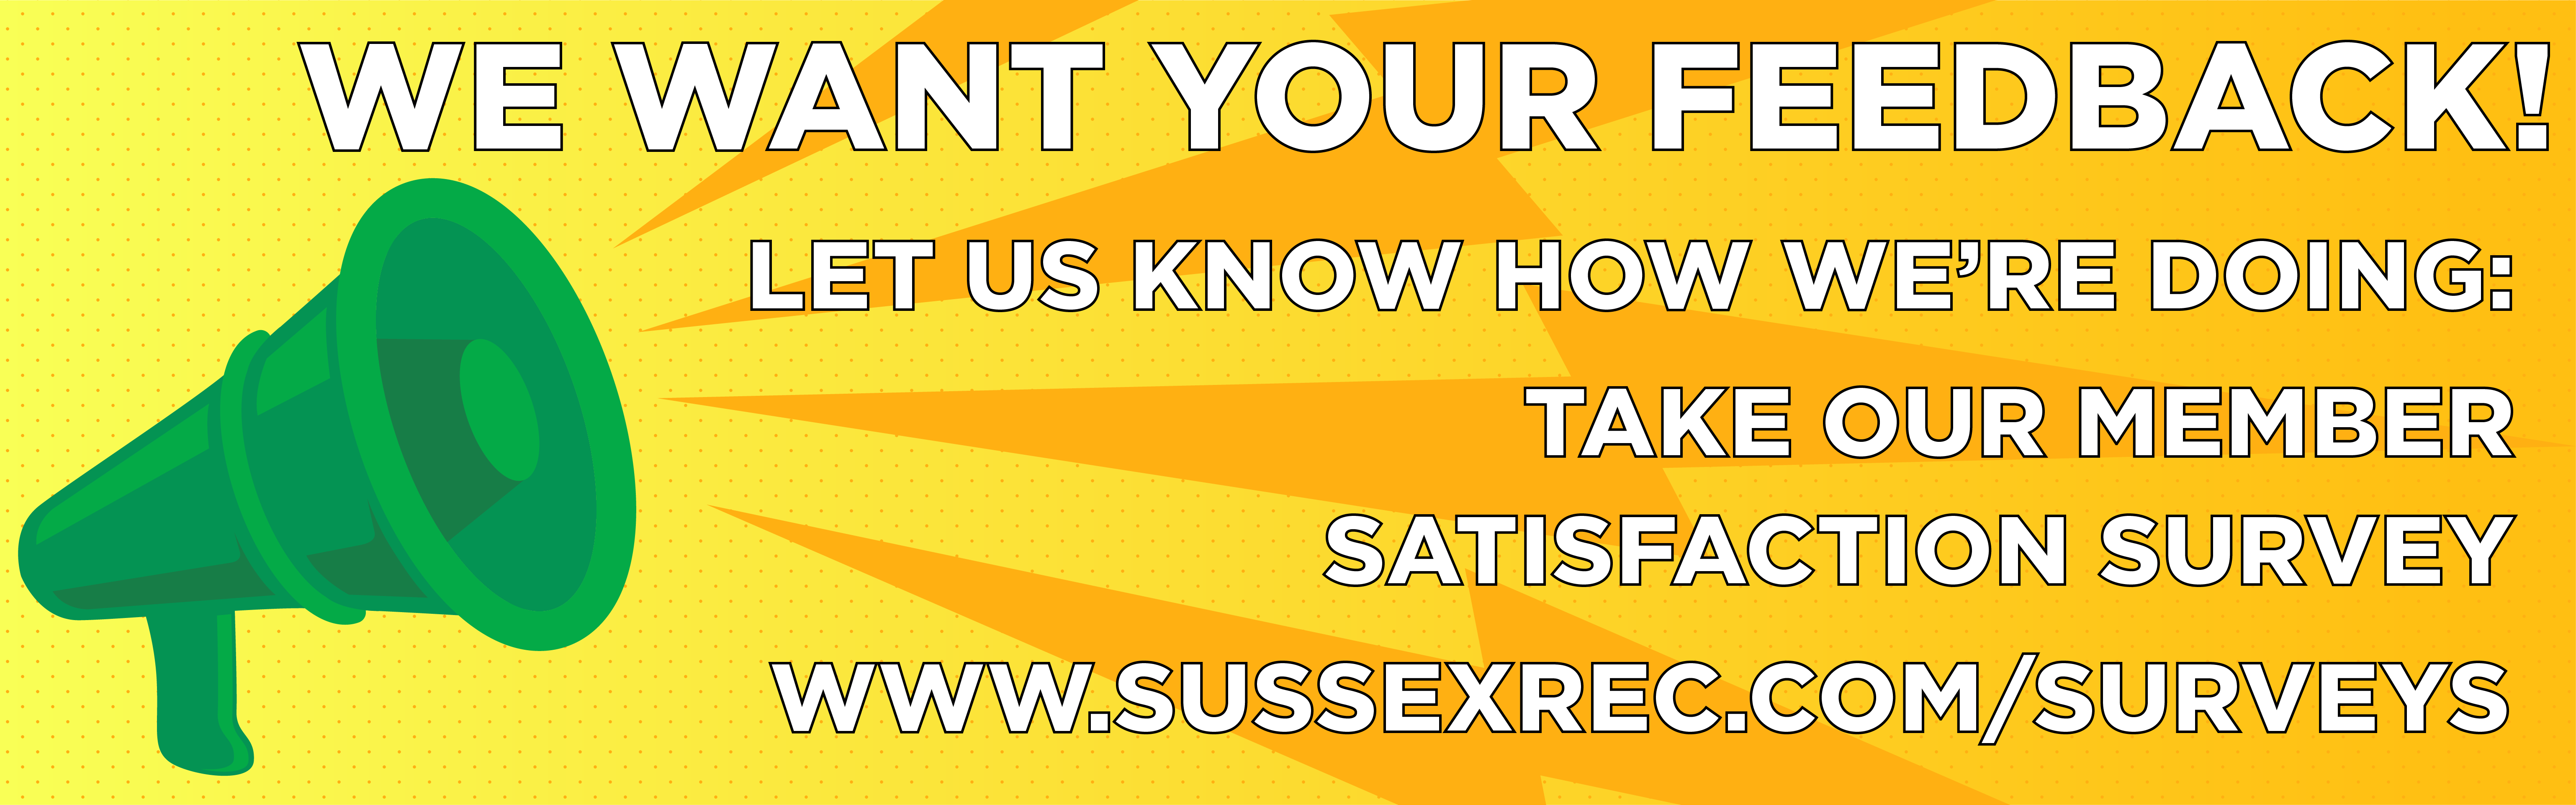 We want your feedback! Let us know how we're doing: Take our Member Satisfaction Survey. www.sussexrec.com/surveys